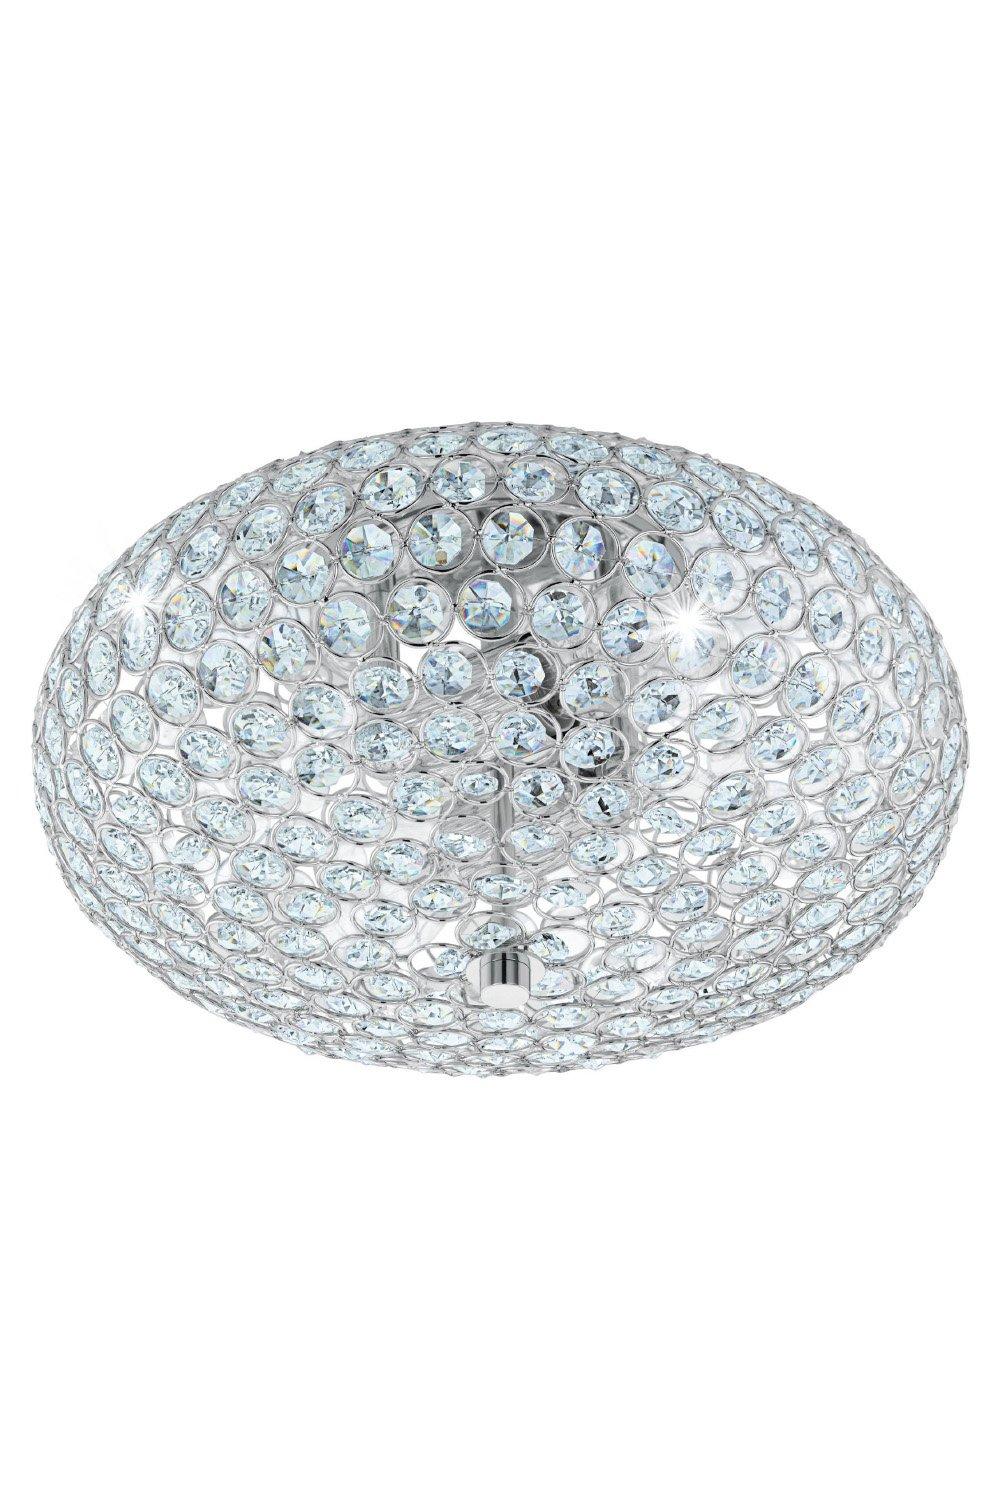 Clemente Metal and Crystal Flush Ceiling Fitting